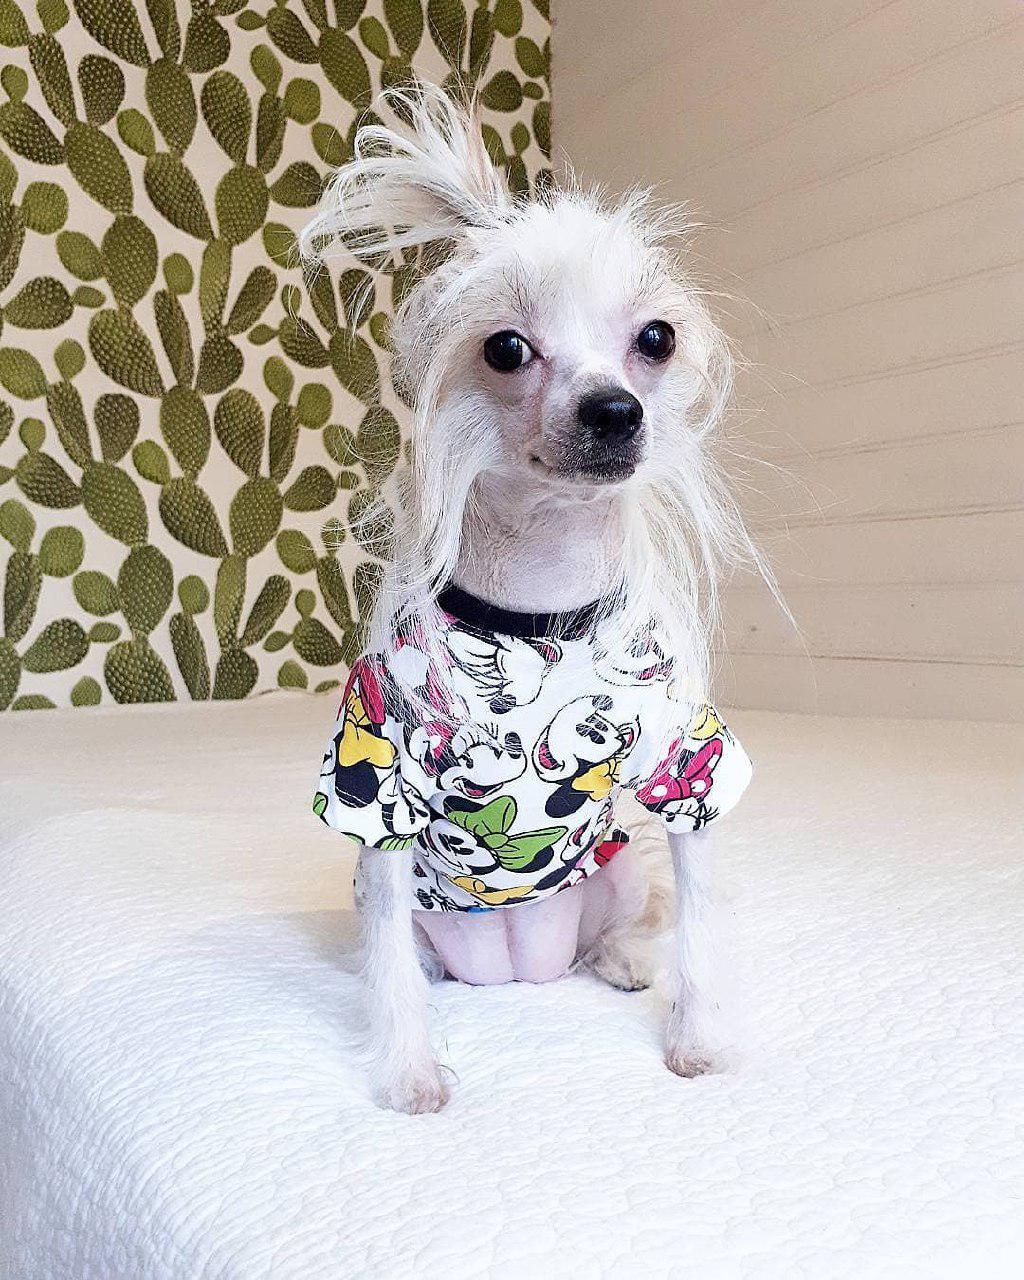 A Chinese Crested wearing a mickey mouse shirt while sitting on the bed